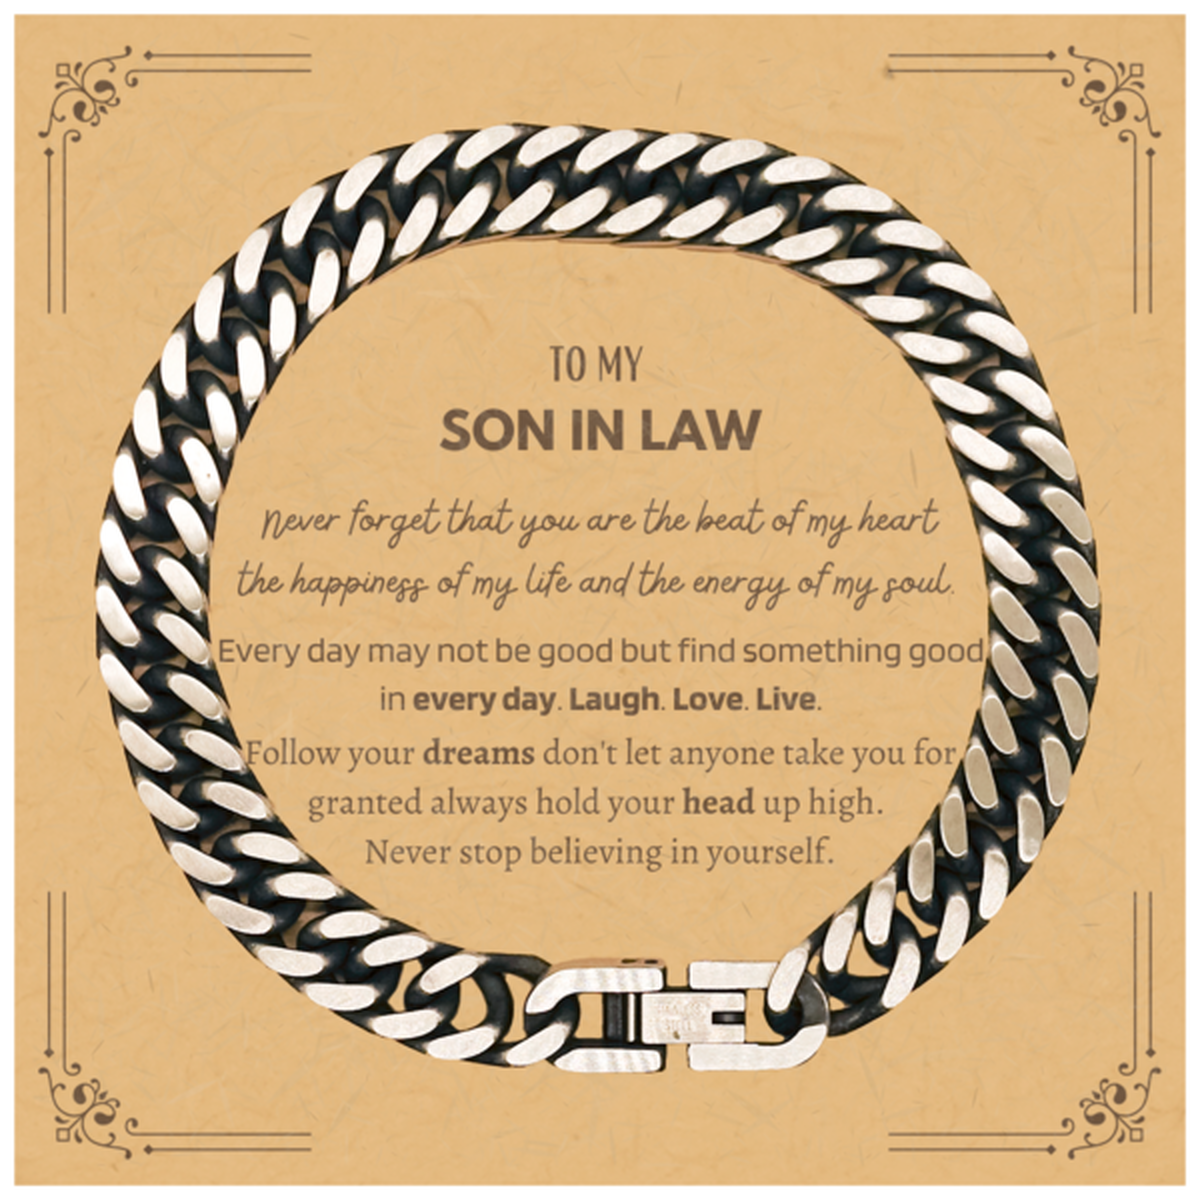 To My Son In Law Message Card Gifts, Christmas Son In Law Cuban Link Chain Bracelet Present, Birthday Unique Motivational For Son In Law, To My Son In Law Never forget that you are the beat of my heart the happiness of my life and the energy of my soul